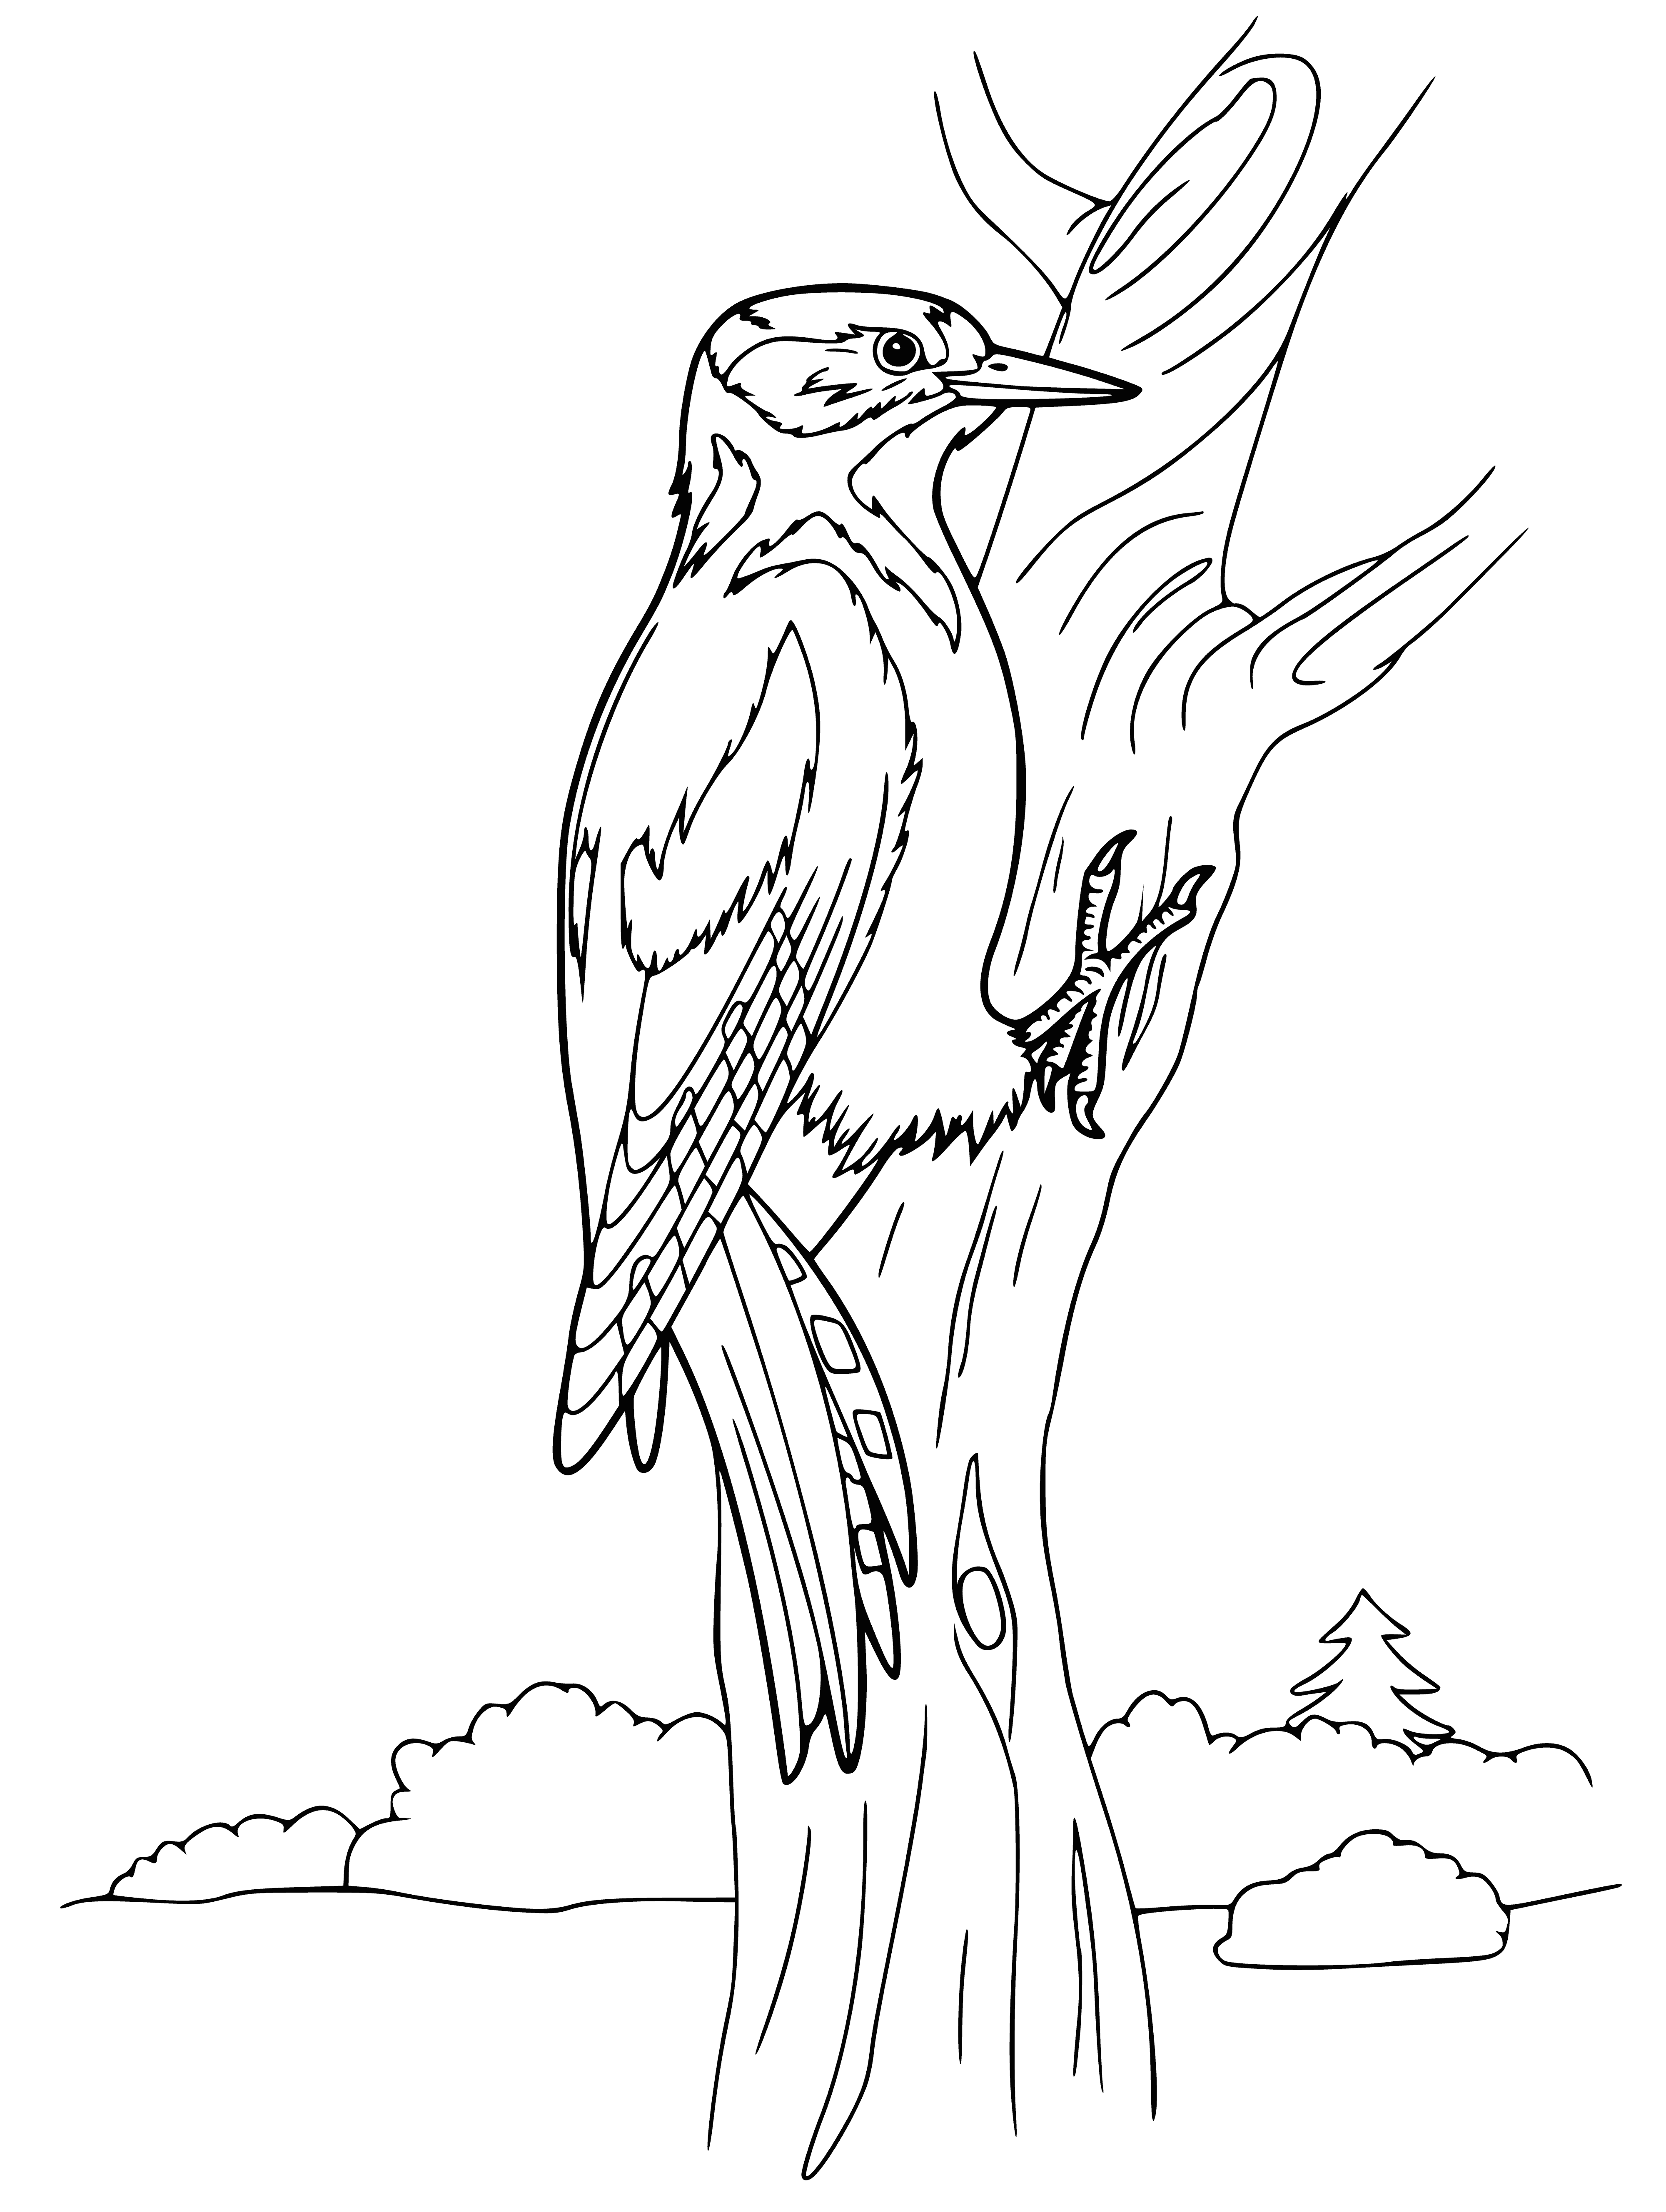 coloring page: Woodpecker has black eyes, white face, brown wings, and a long tail, as it hammers beak into tree and wraps its tongue around head.